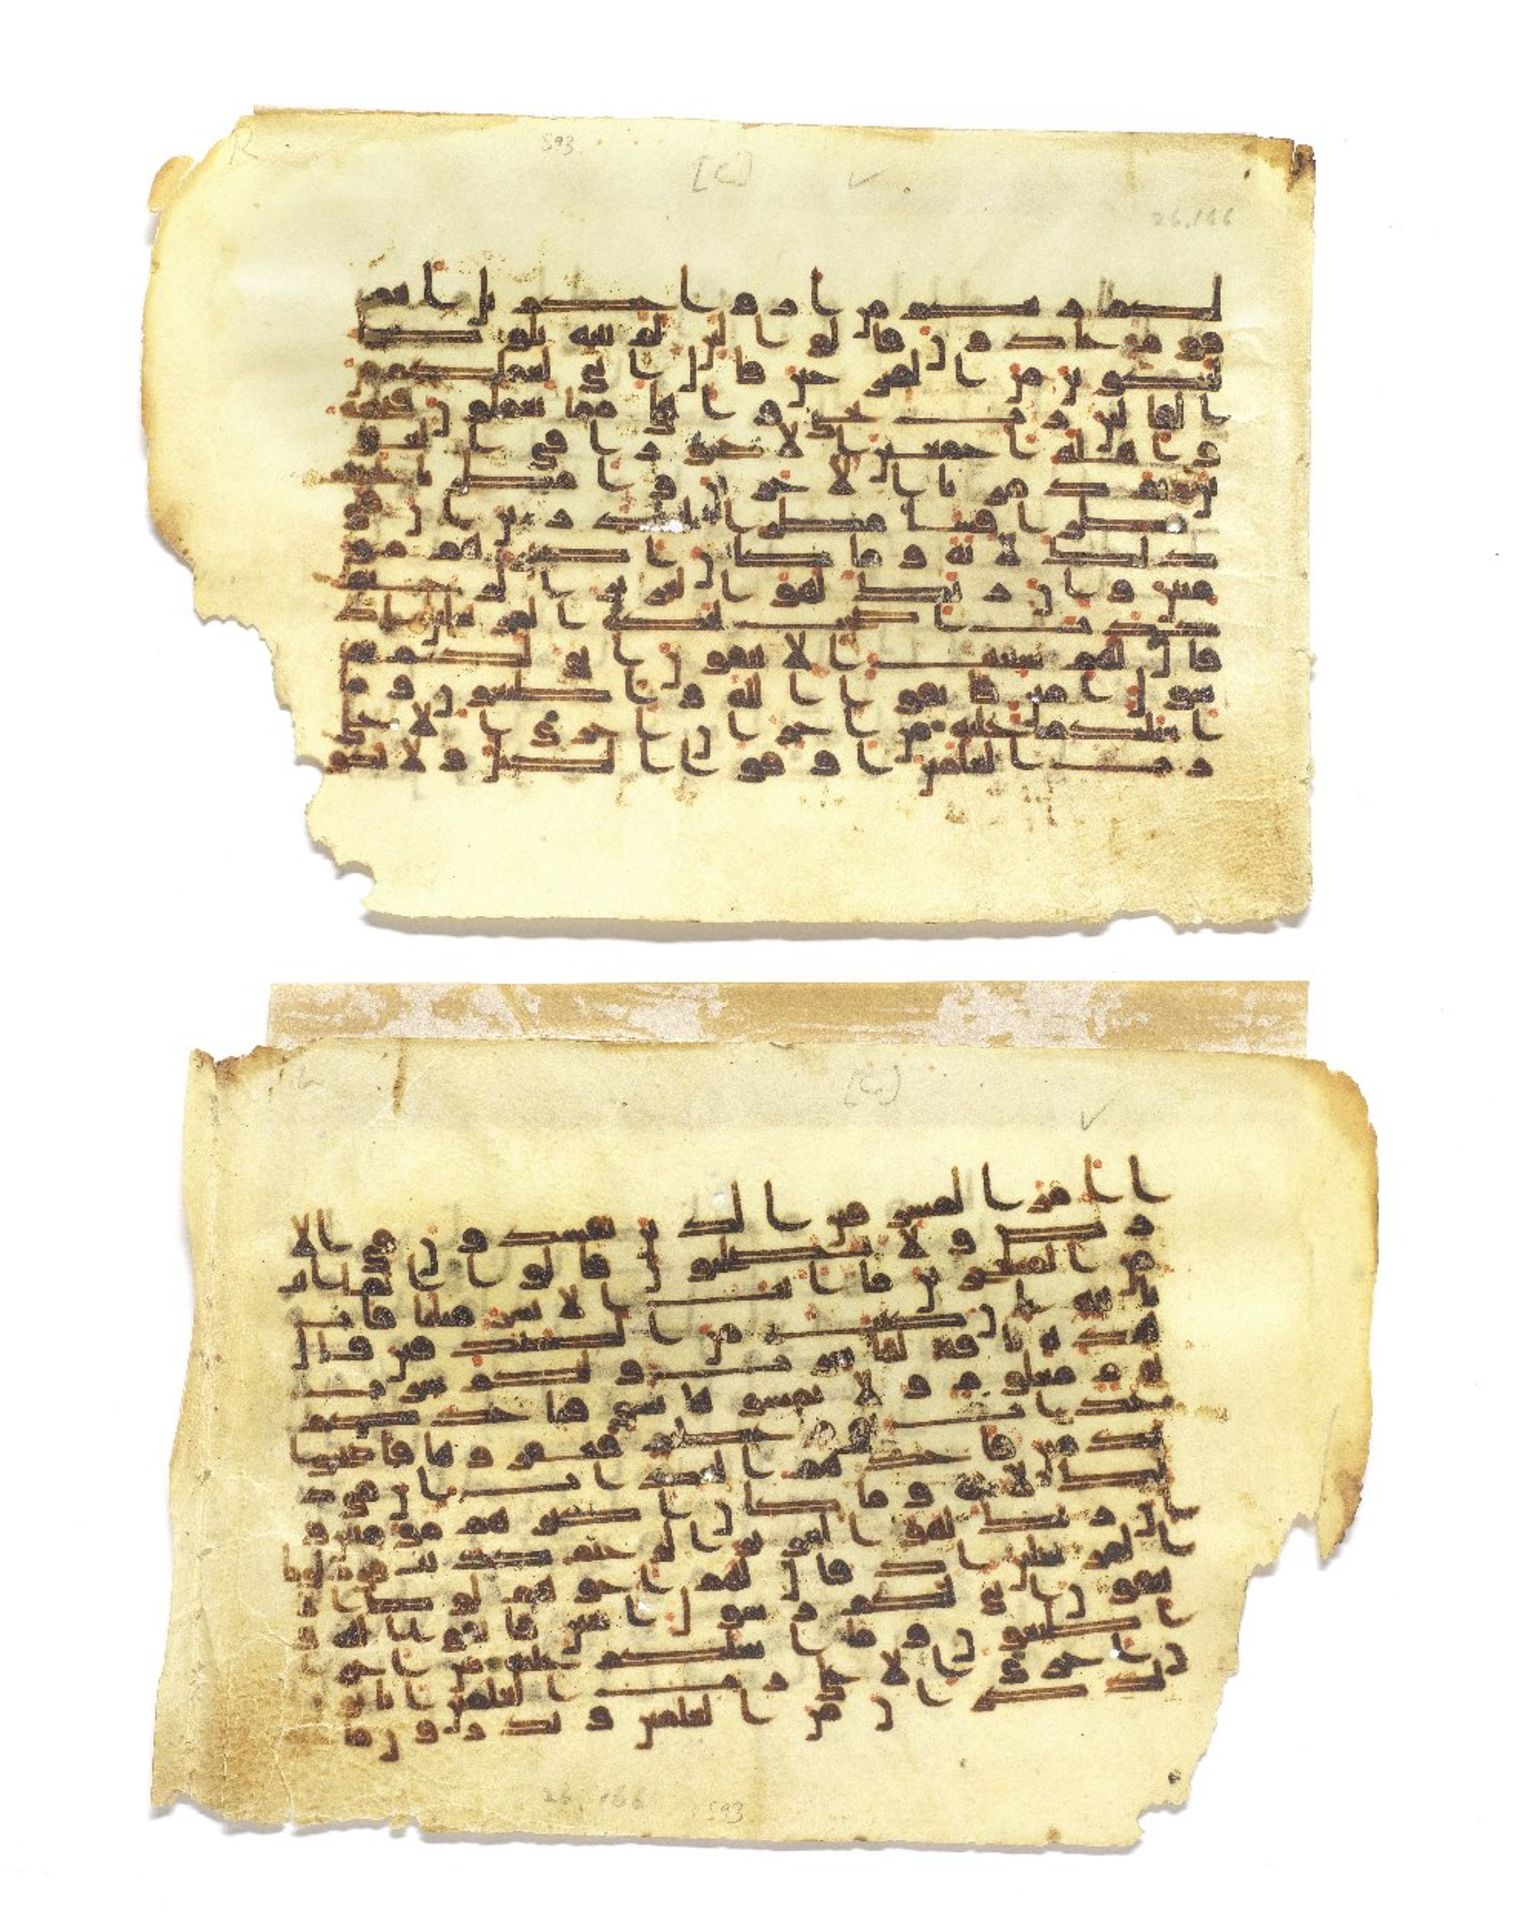 Two consecutive leaves from a manuscript of the Qur'an written in kufic script on vellum Near Ea...